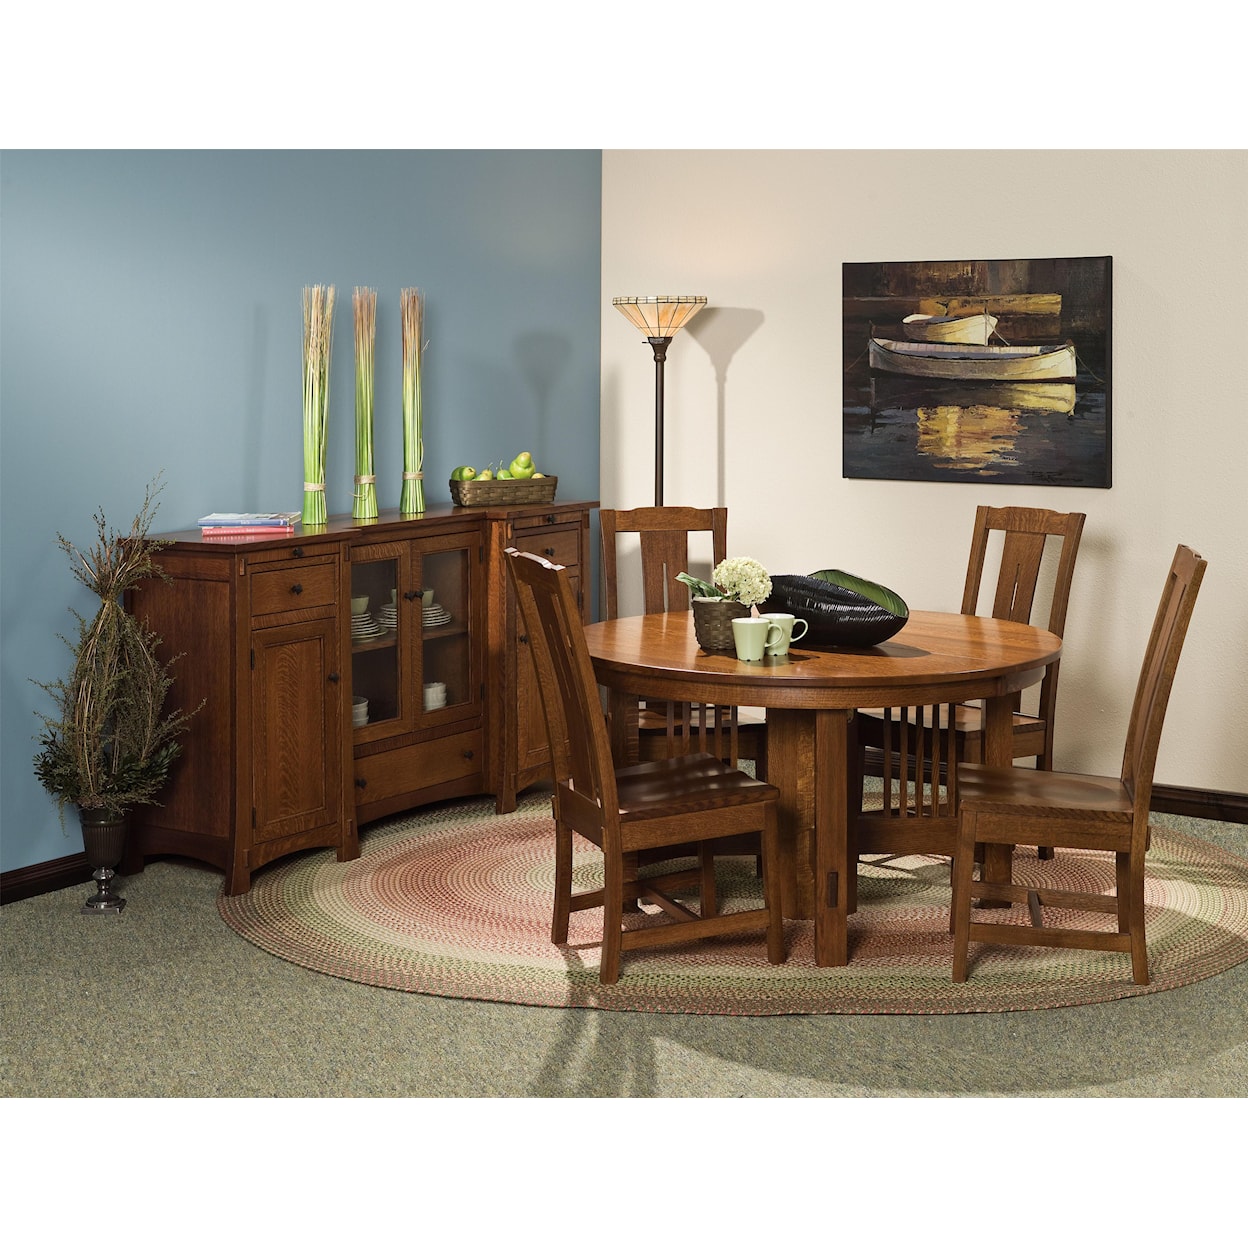 Amish Impressions by Fusion Designs Heartland 5 pc. 54" Table and Chairs Set